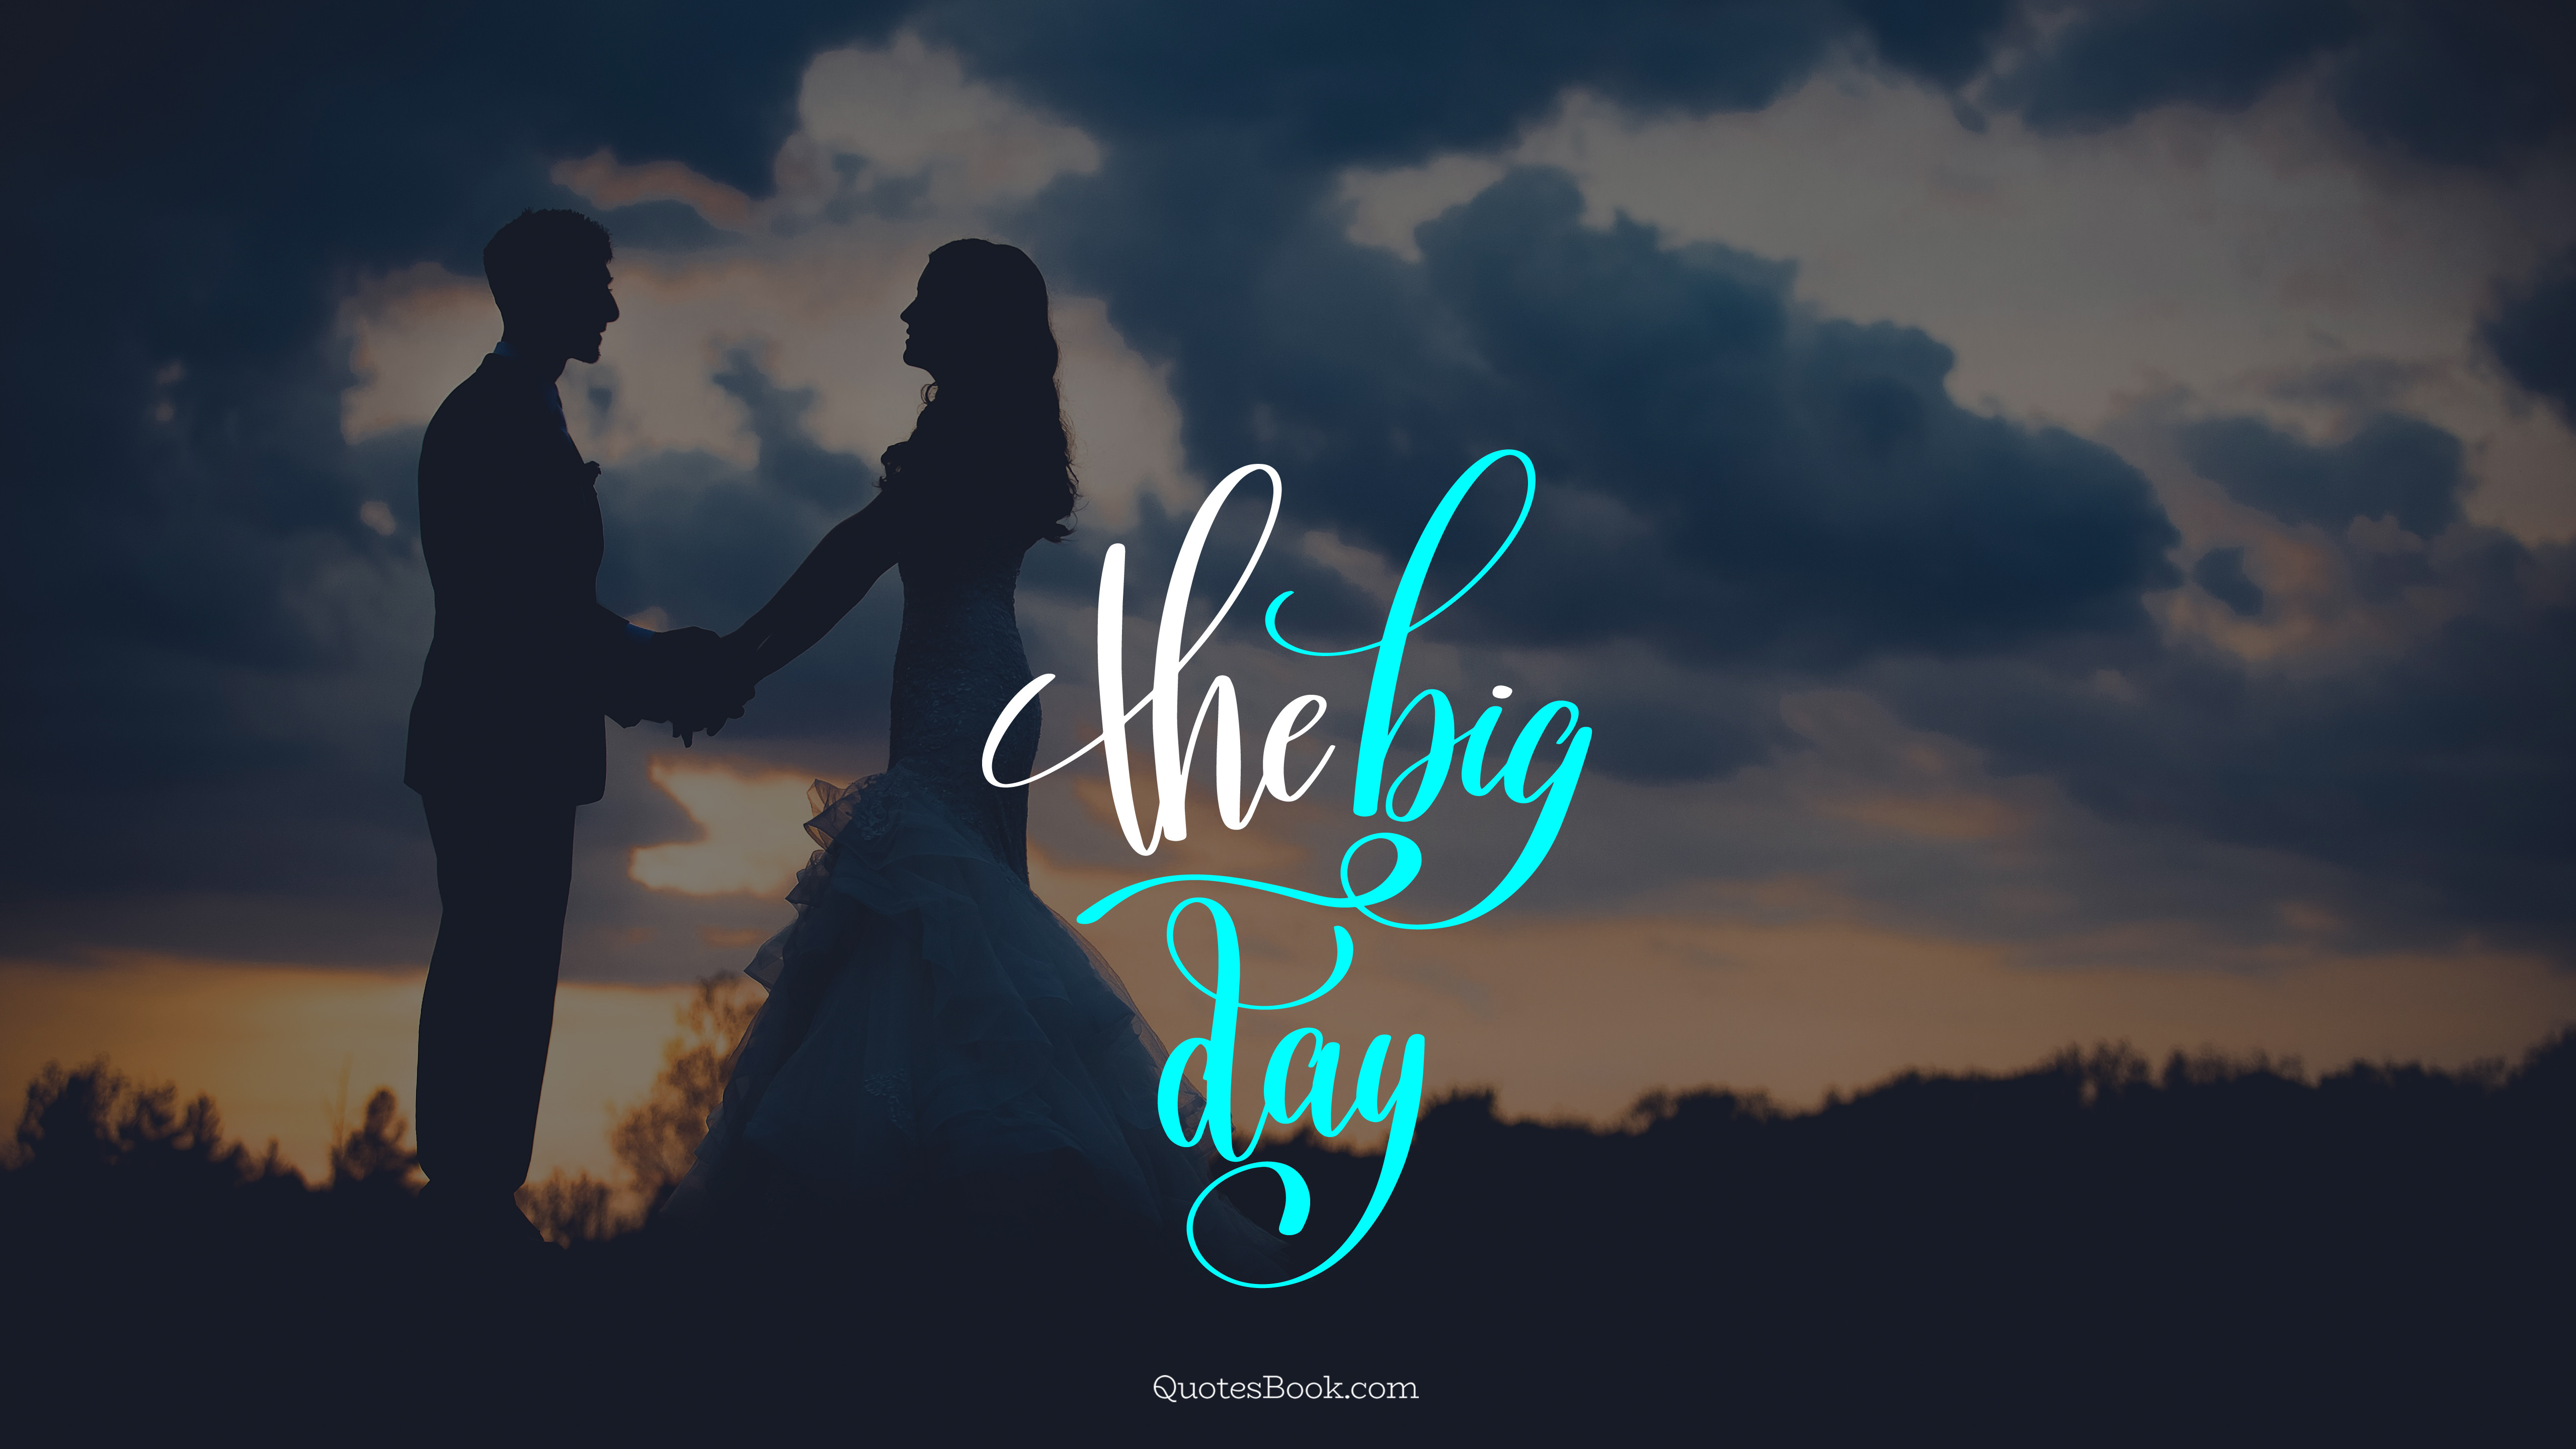 the big day 5120x2880 3938